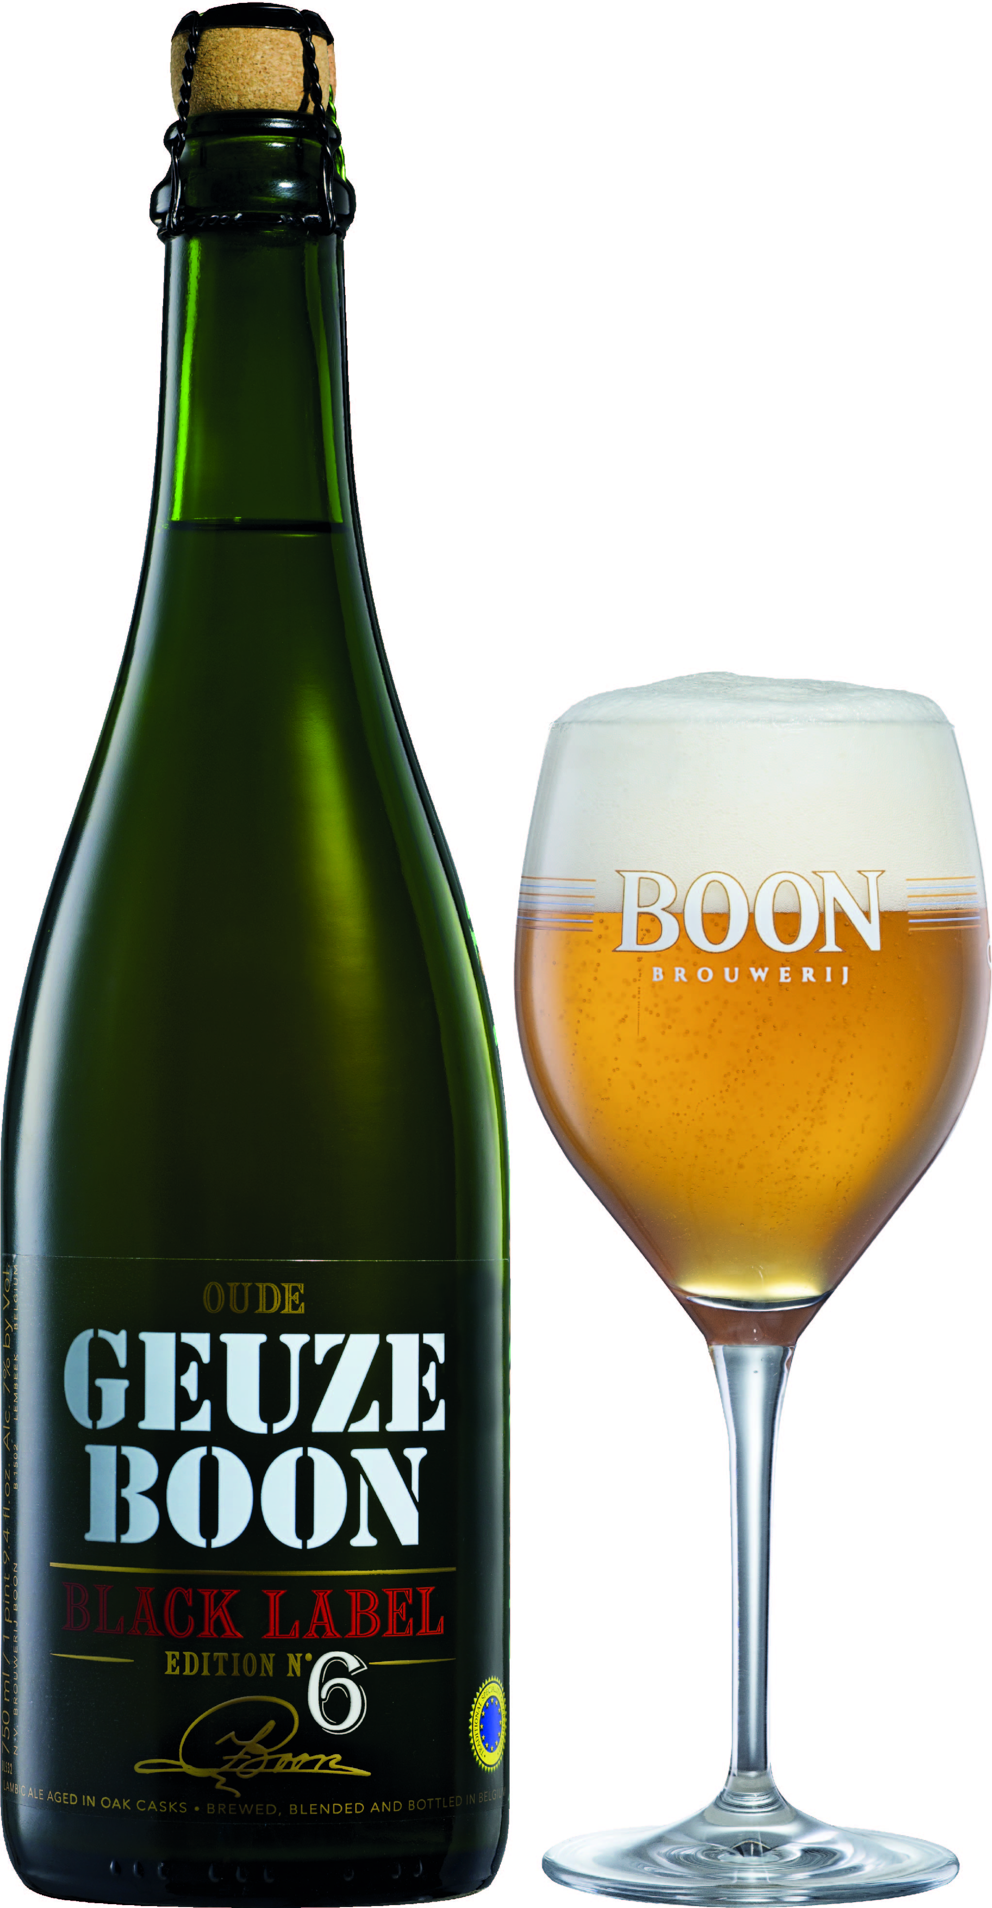 Boon Oude Geuze Black Label Edition N°6 Wins Gold at Brussels Beer Challenge 2021